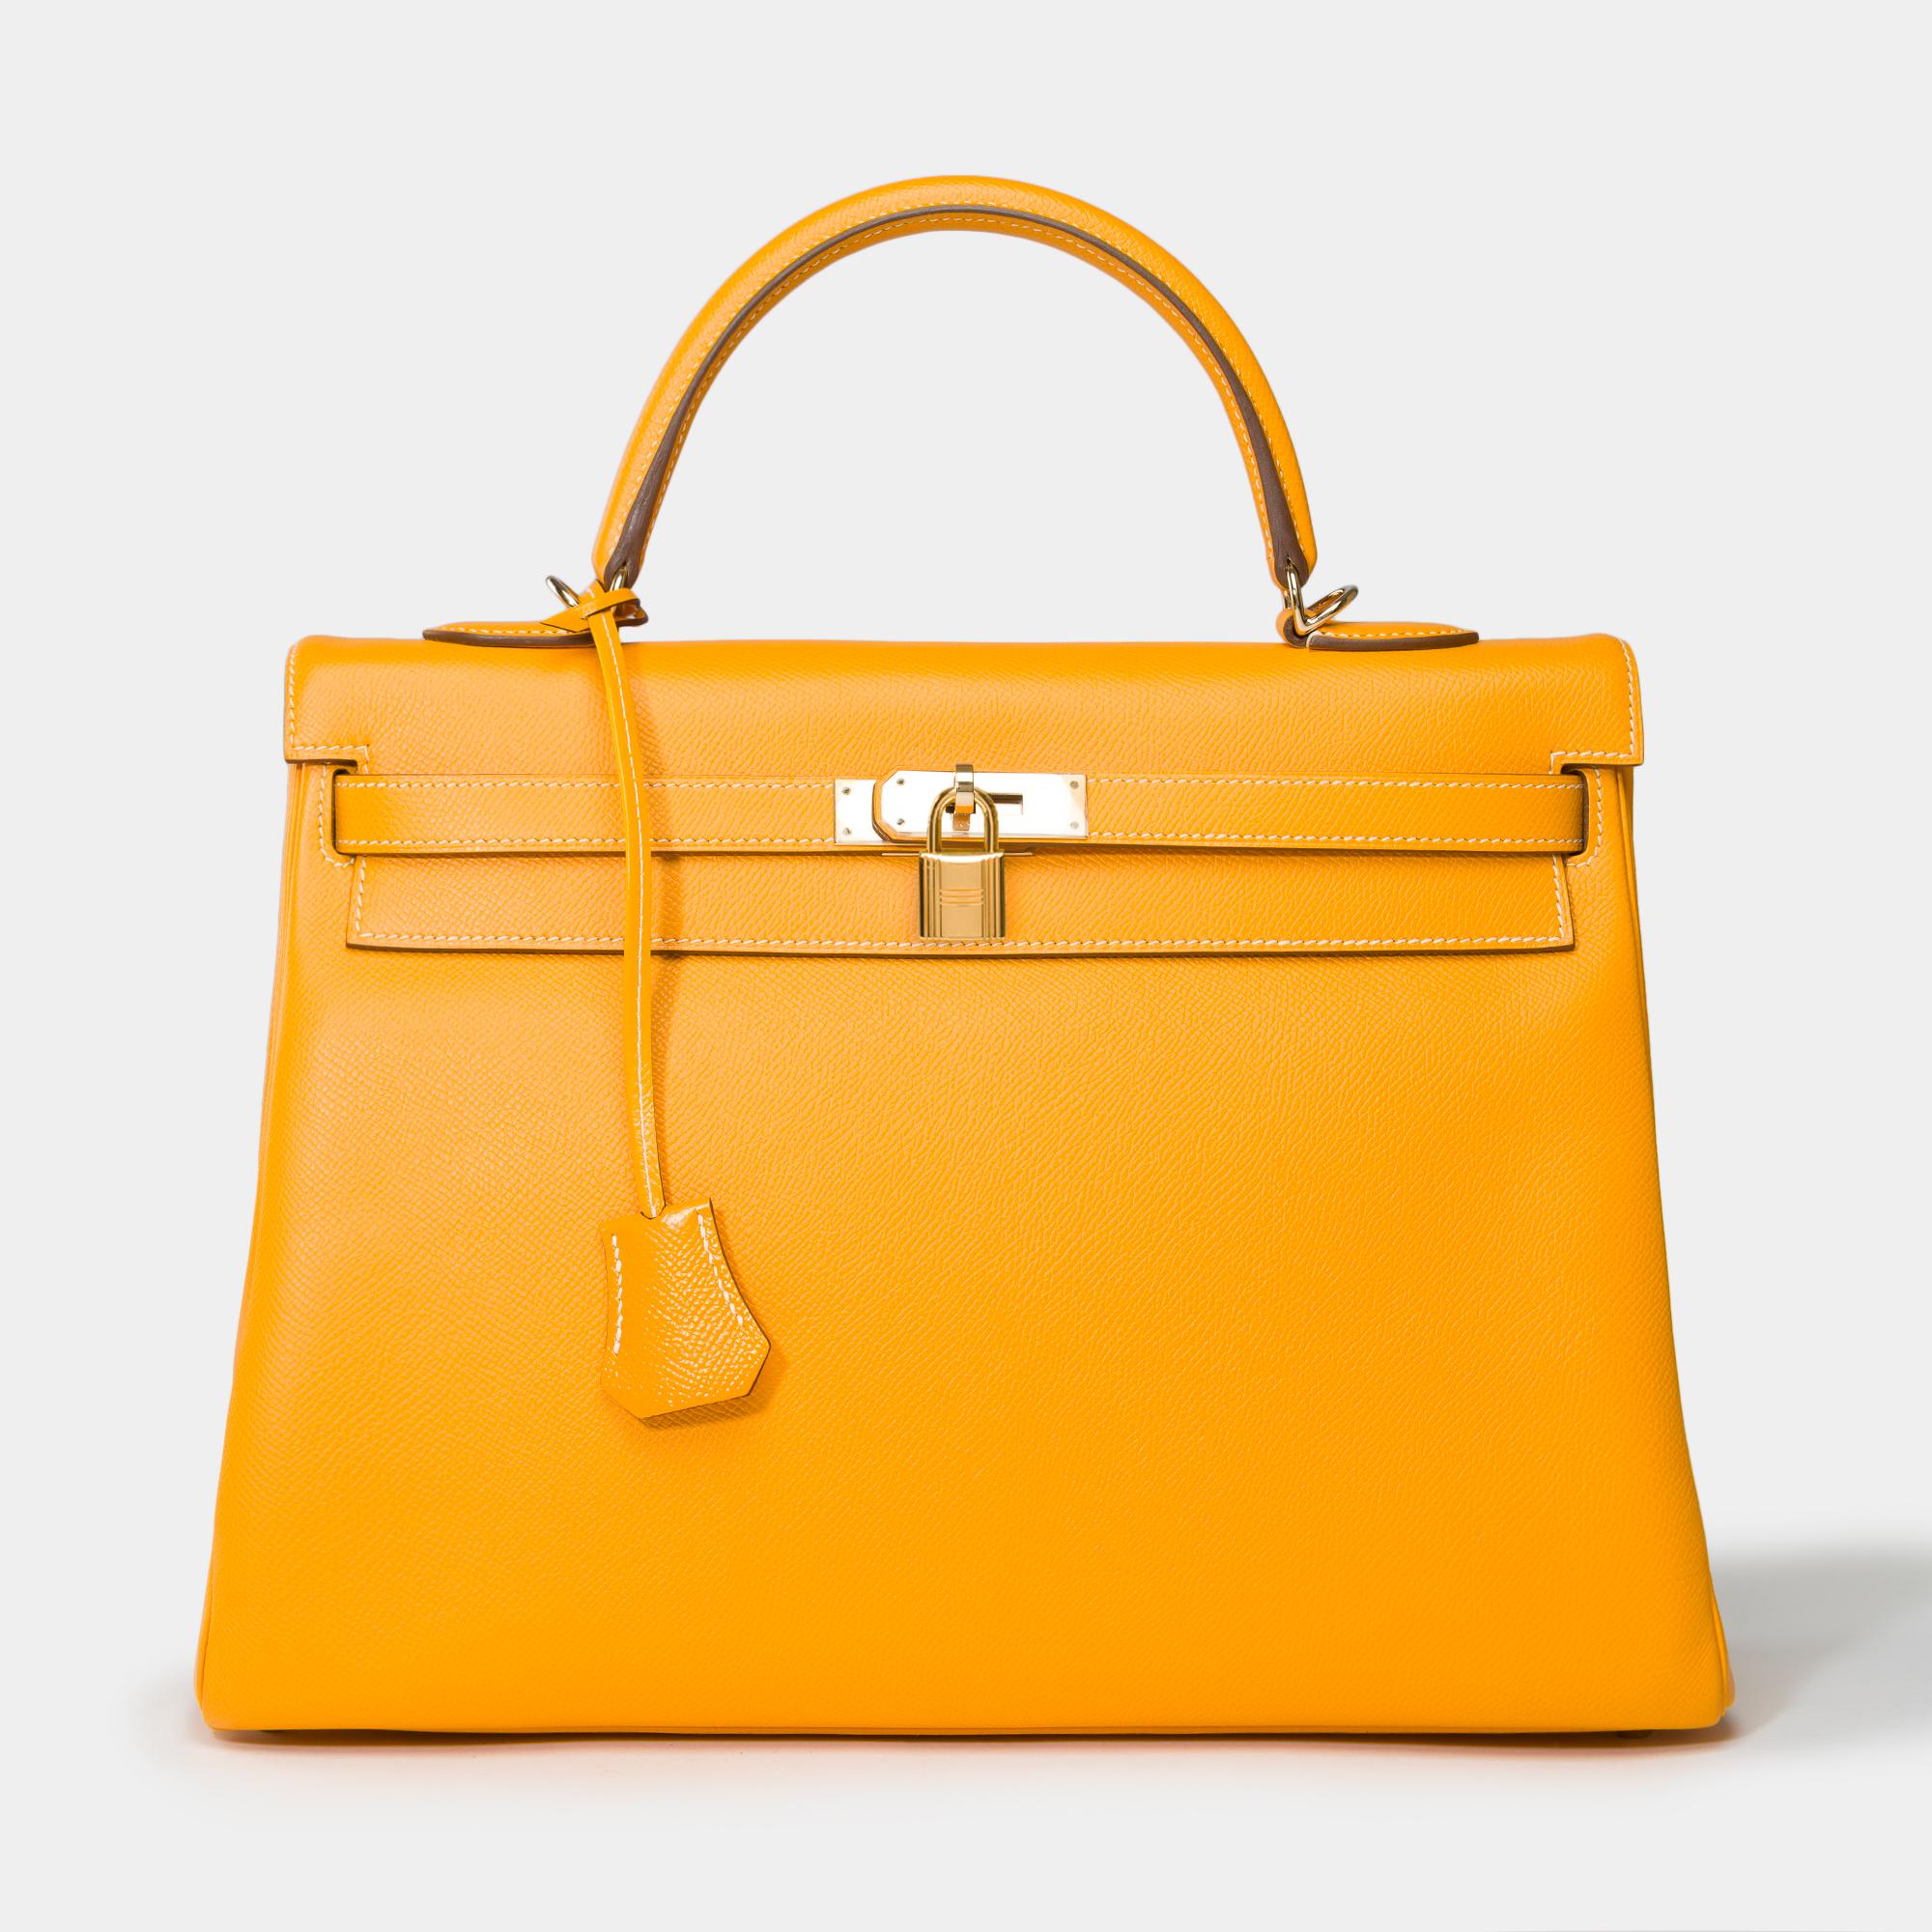 Gorgeous​ ​&​ ​Rare​ ​Hermes​ ​Kelly​ ​35​ ​retourne​ ​handbag​ ​strap​ ​limited​ ​edition​ ​from​ ​the​ ​Candy​ ​Collection​ ​in​ ​Epsom​ ​Yellow​ ​Jaune​ ​d'Or​ ​leather​ ​with​ ​white​ ​wtitching​ ​and​ ​pumpkin​ ​leather​ ​Interior,​ ​​ ​​